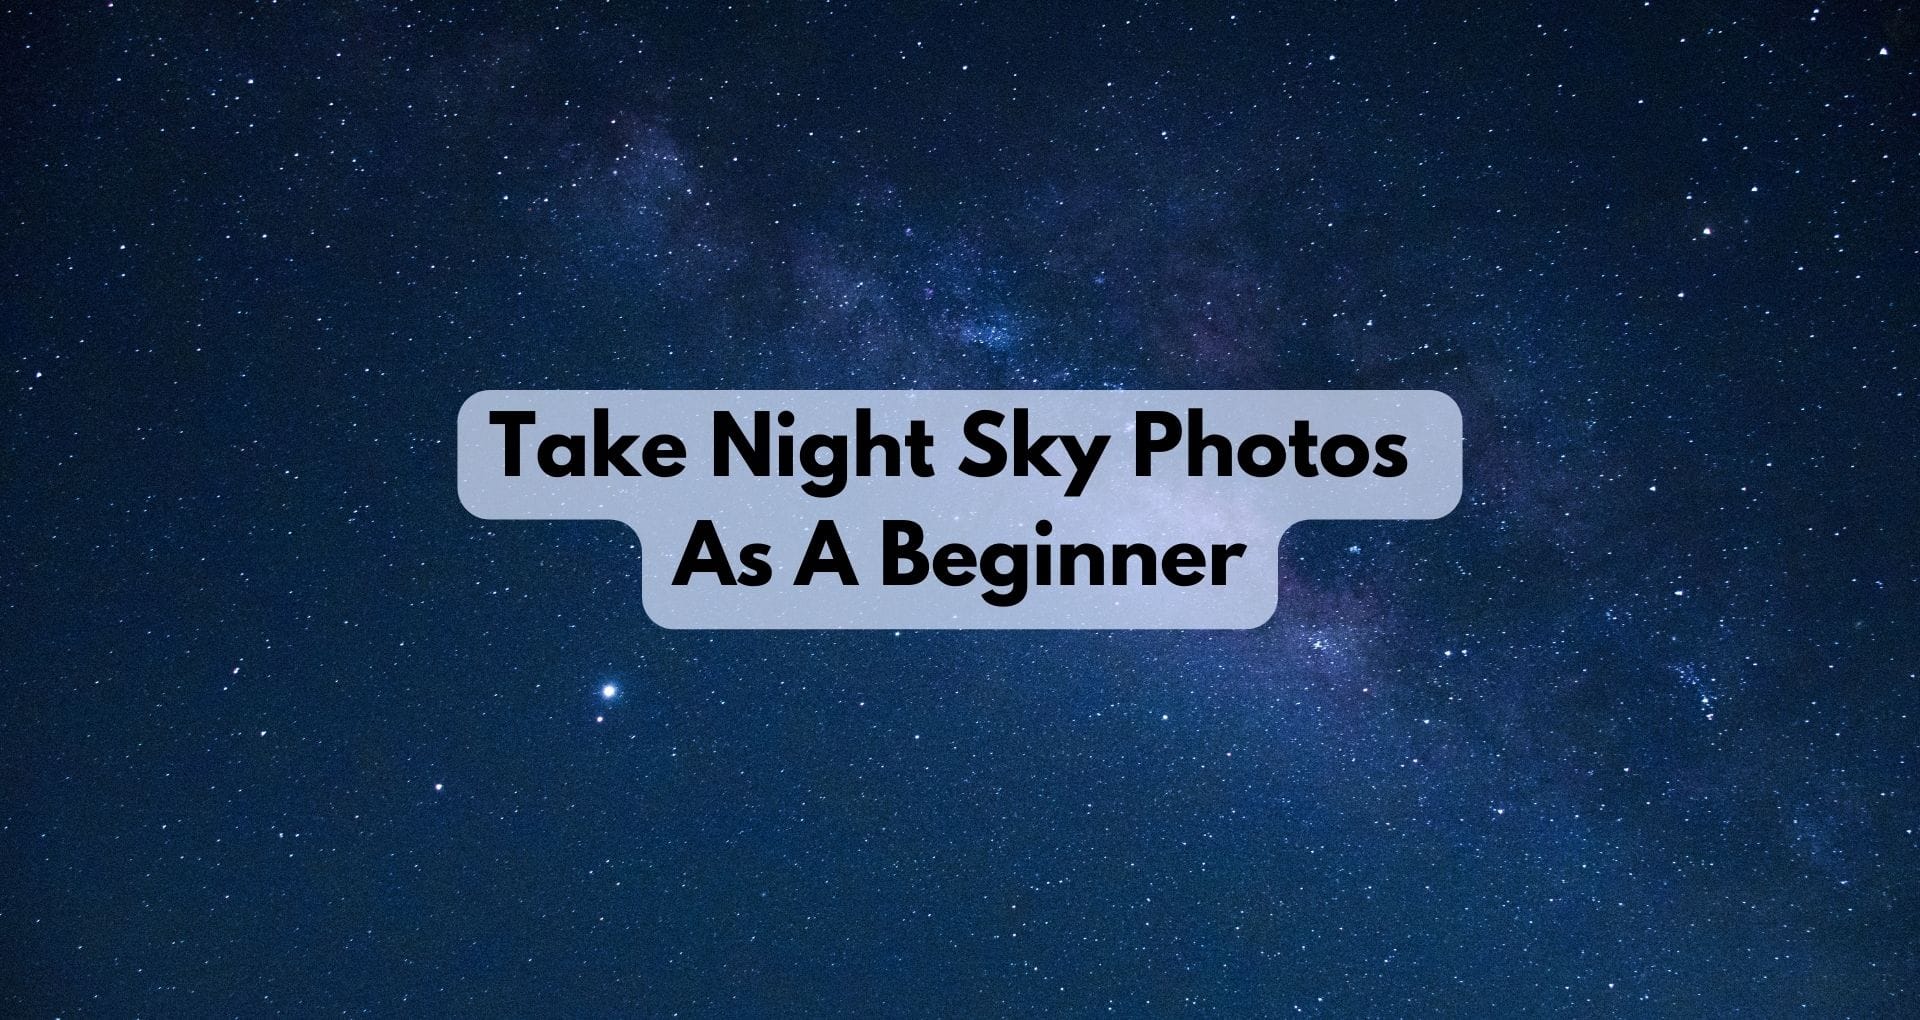 How To Take Night Sky Photos As A Beginner